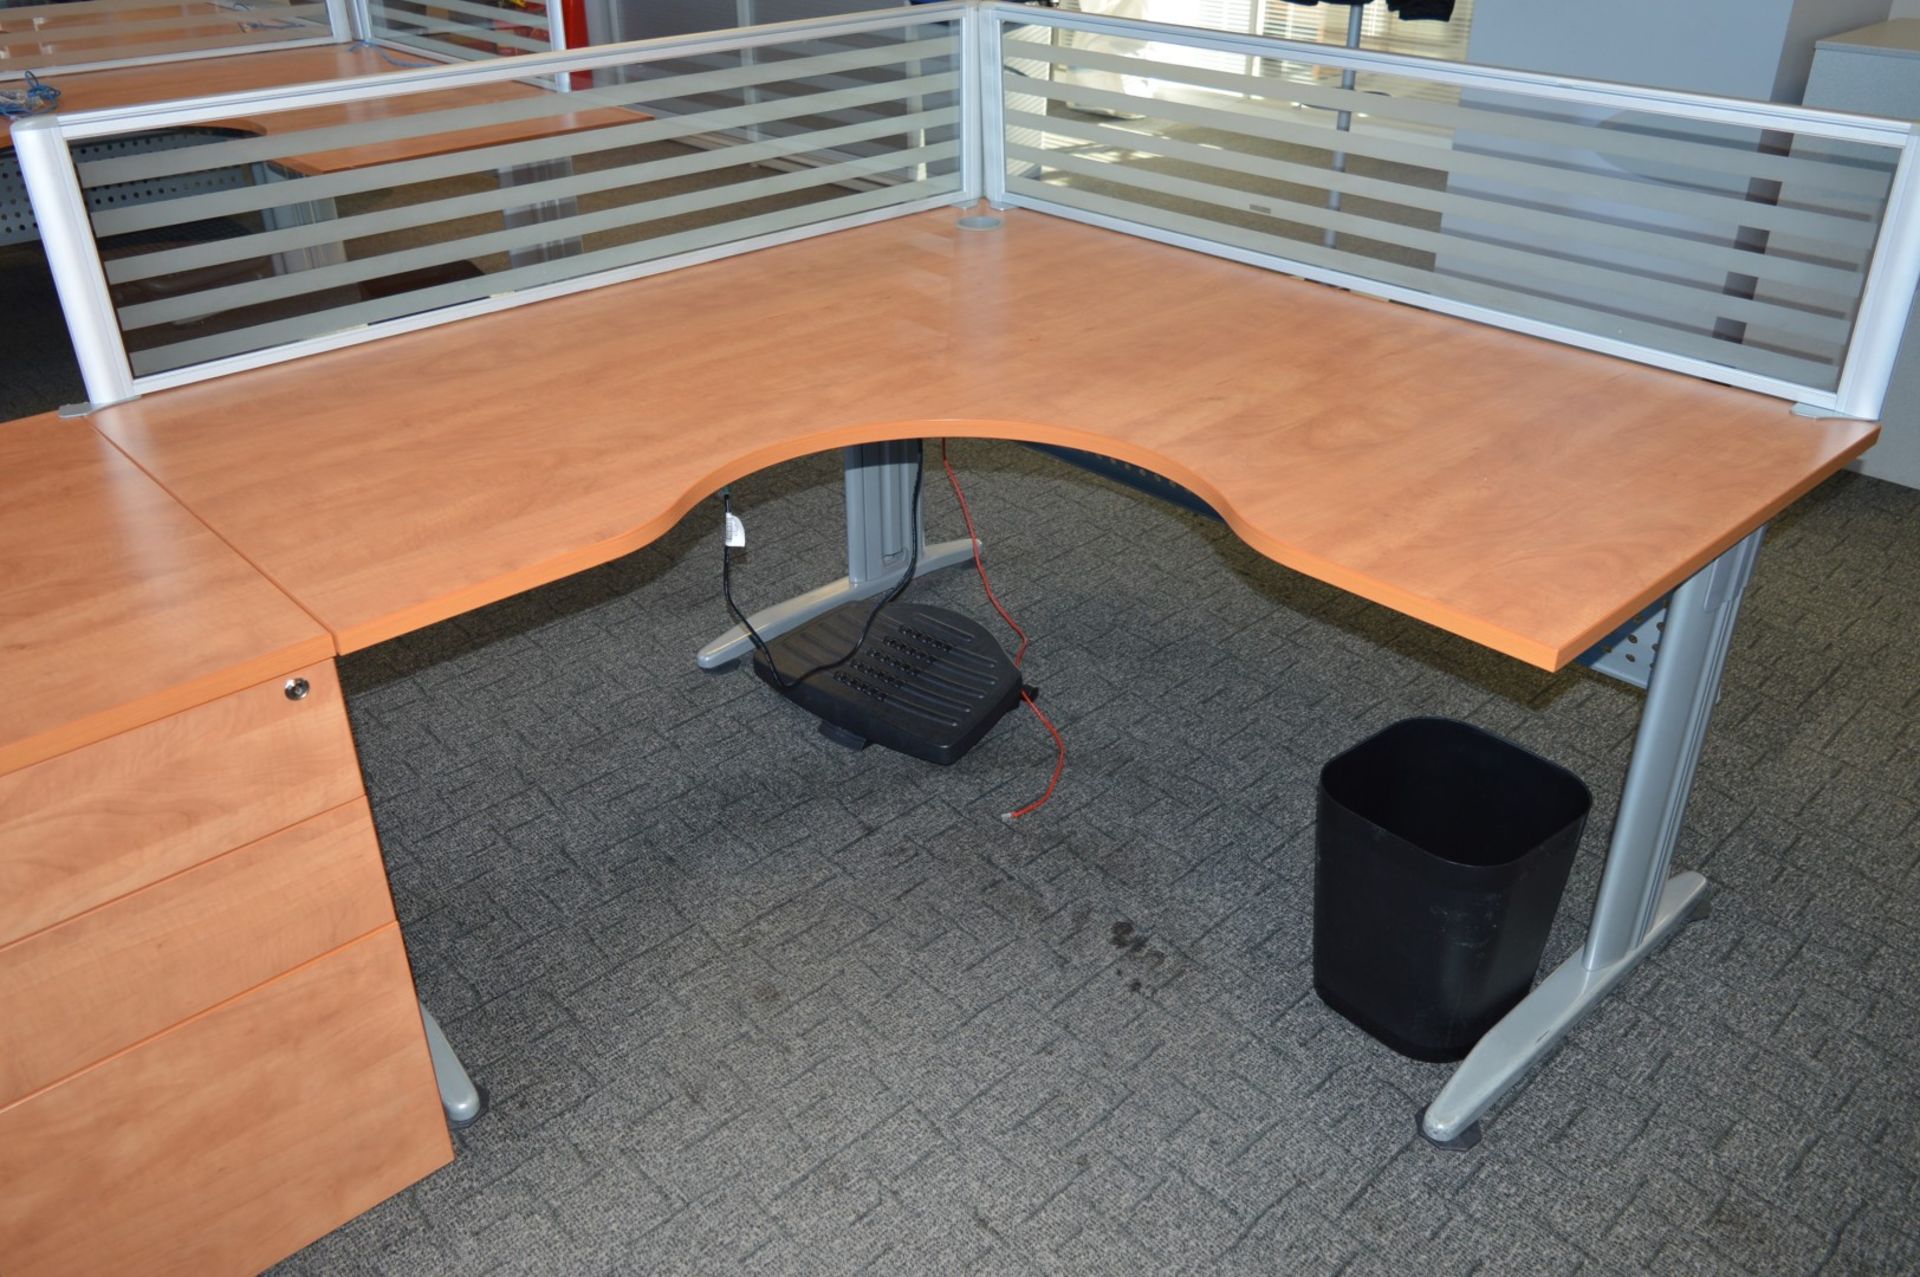 43 x Office Desk Dividing Partitions - High Quality Glass Dividers With Metal Frames and Desk Clamps - Image 2 of 5